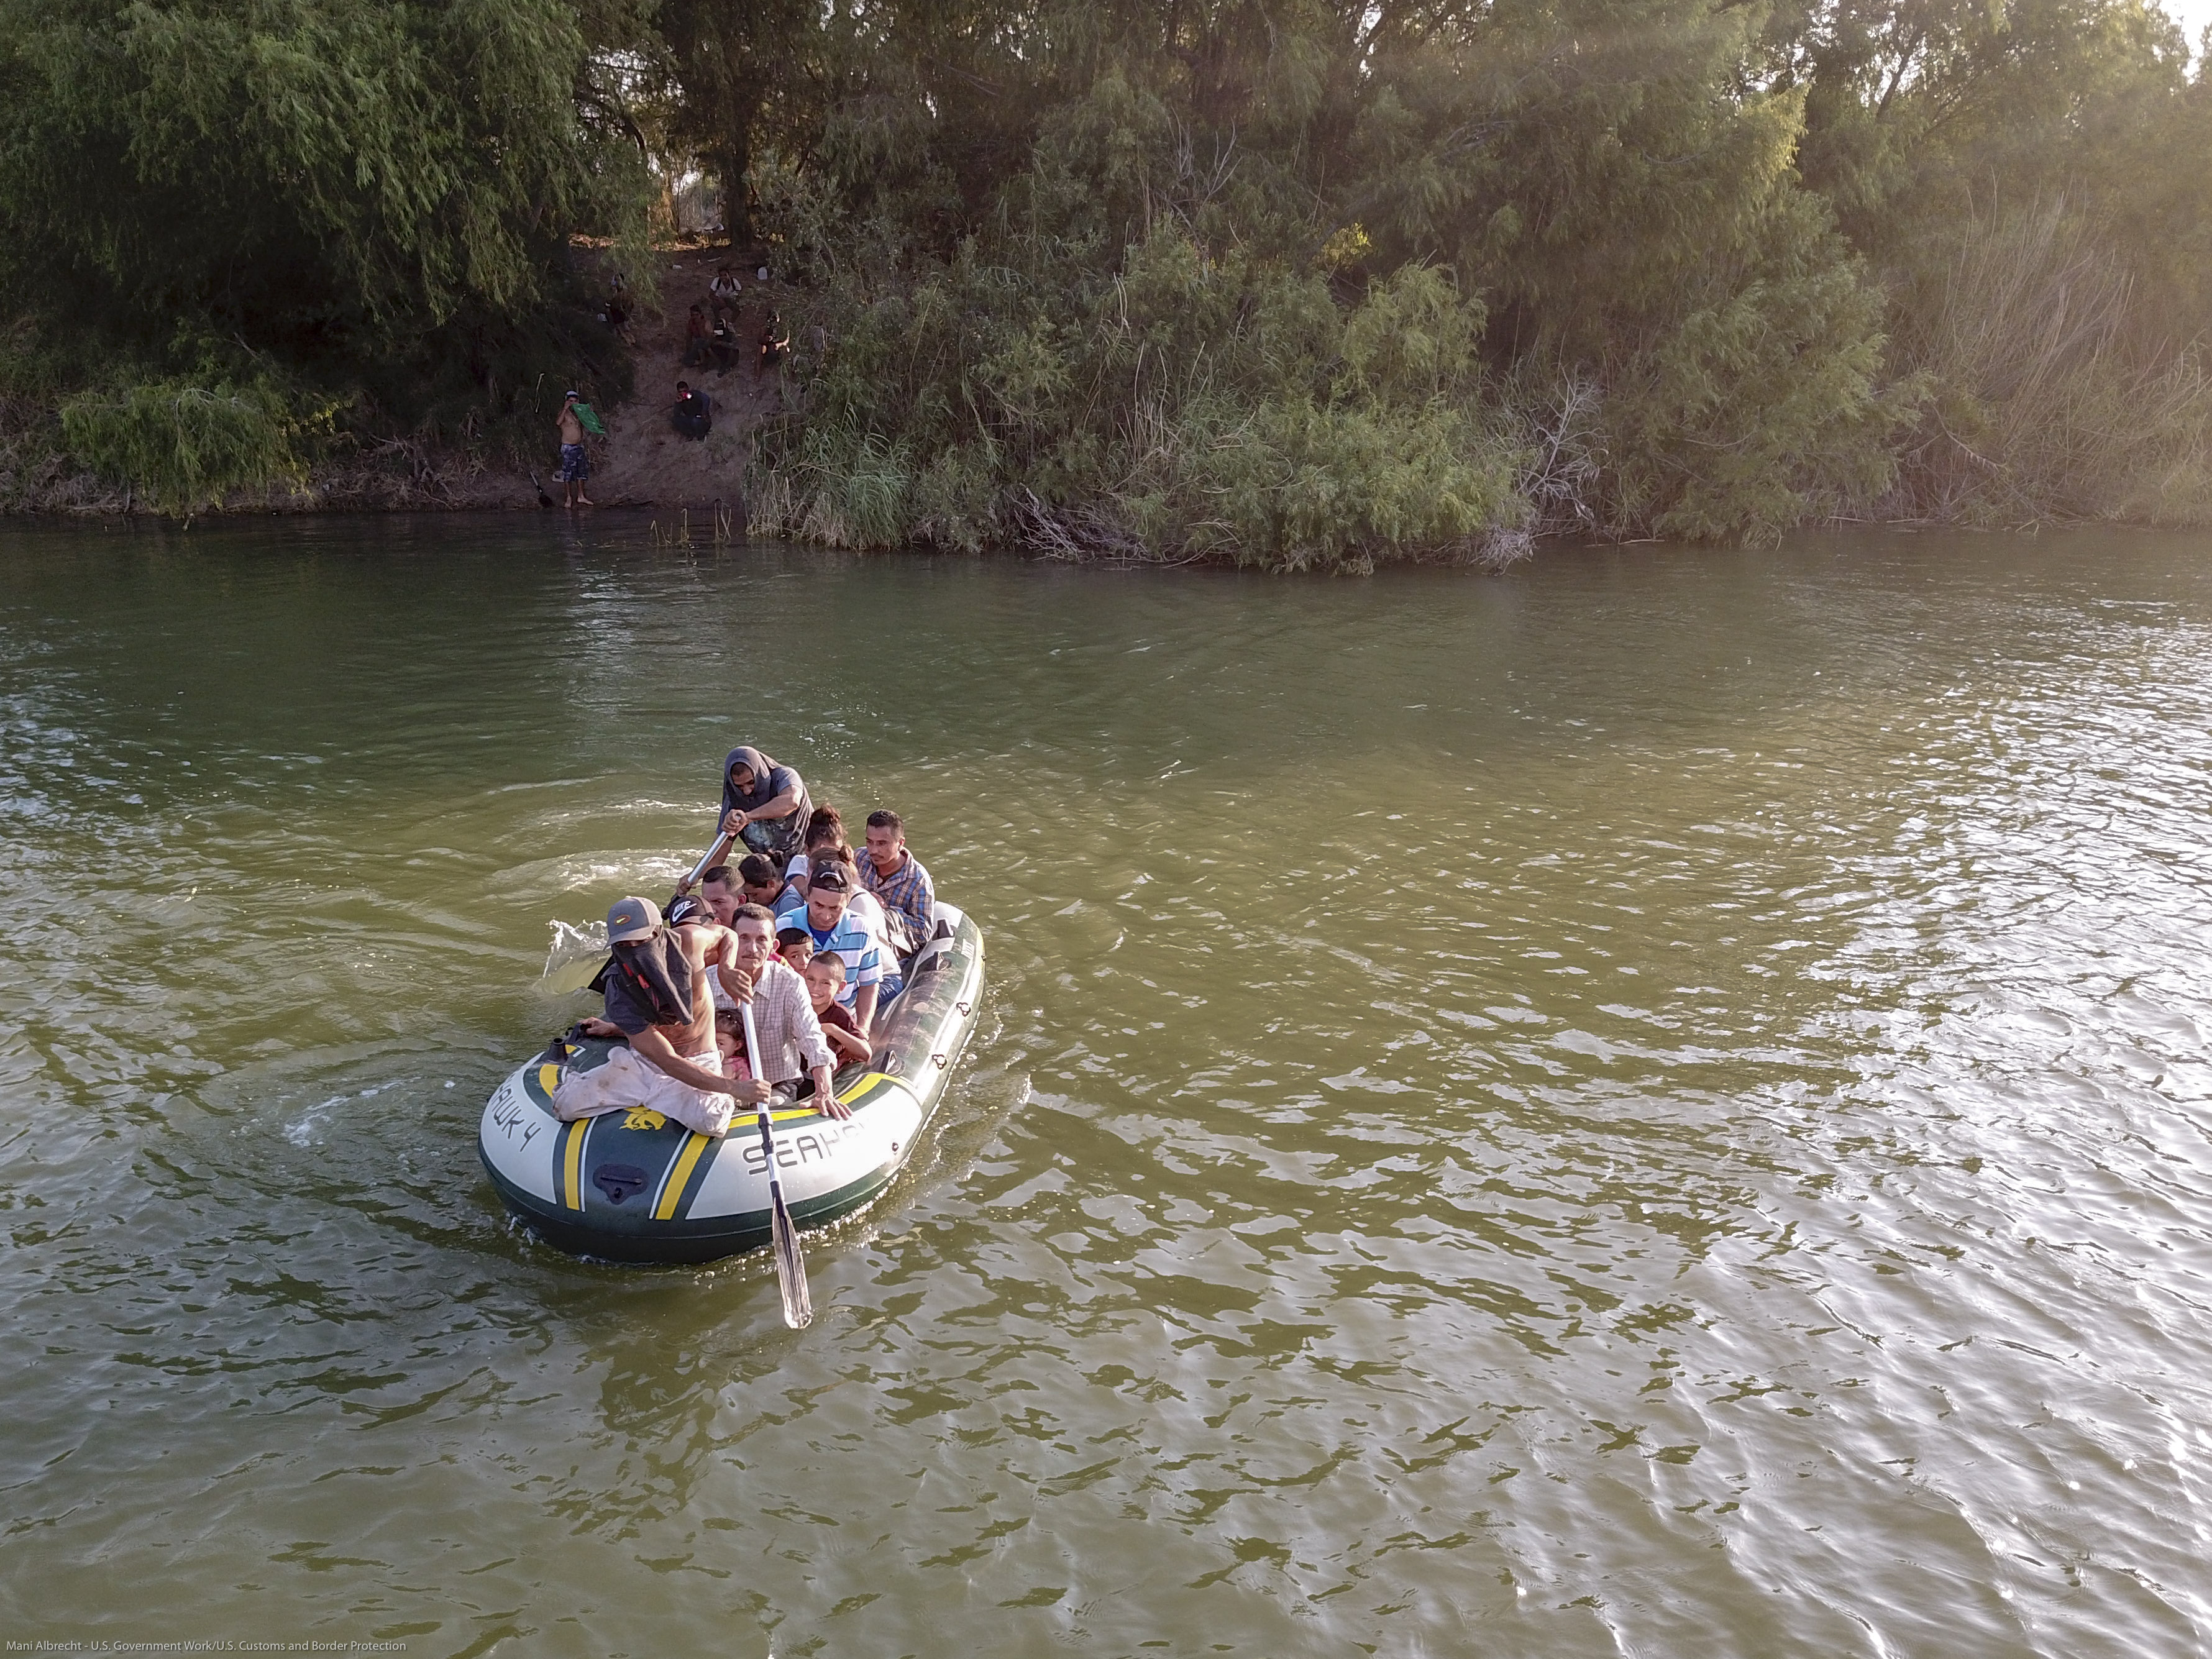 People in a boat on the Rio Grande.